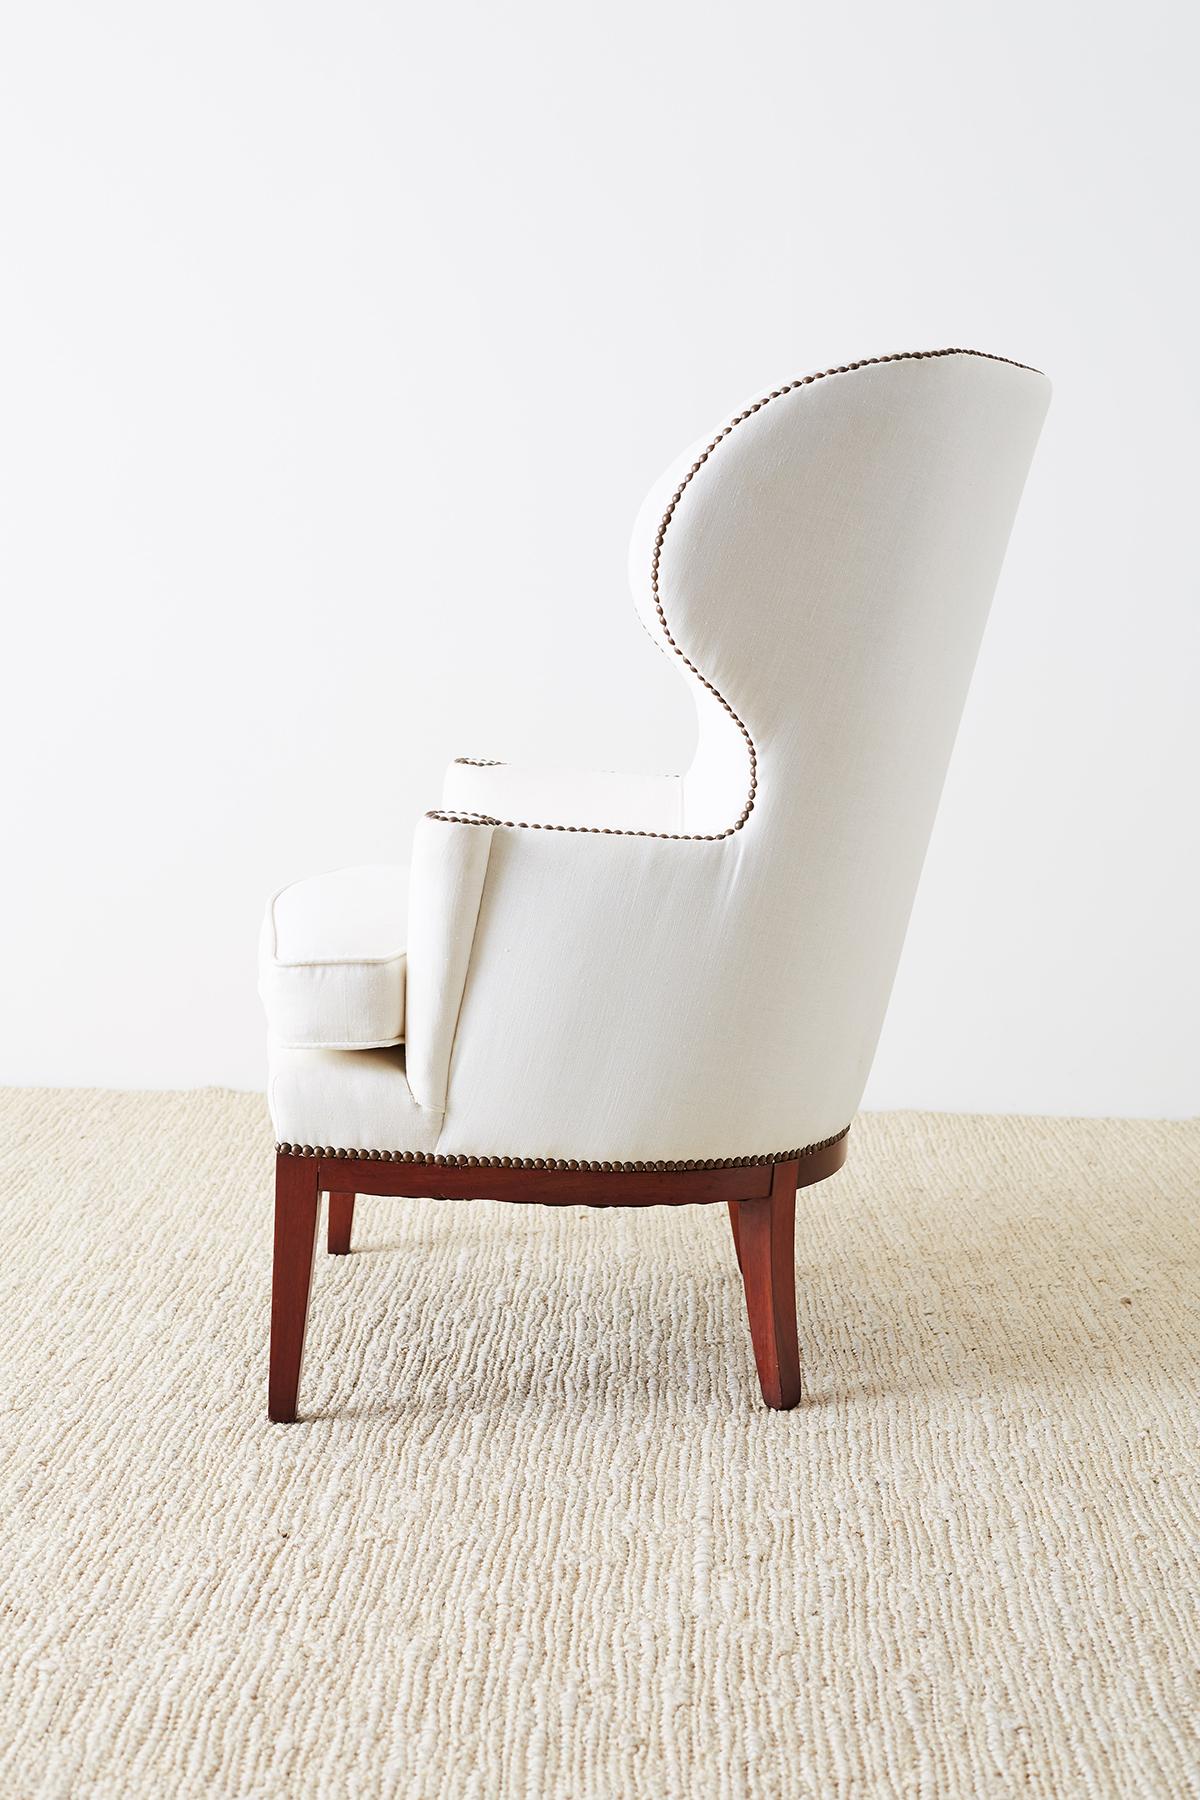 Midcentury Wing Chair by Edward Wormley for Dunbar 6